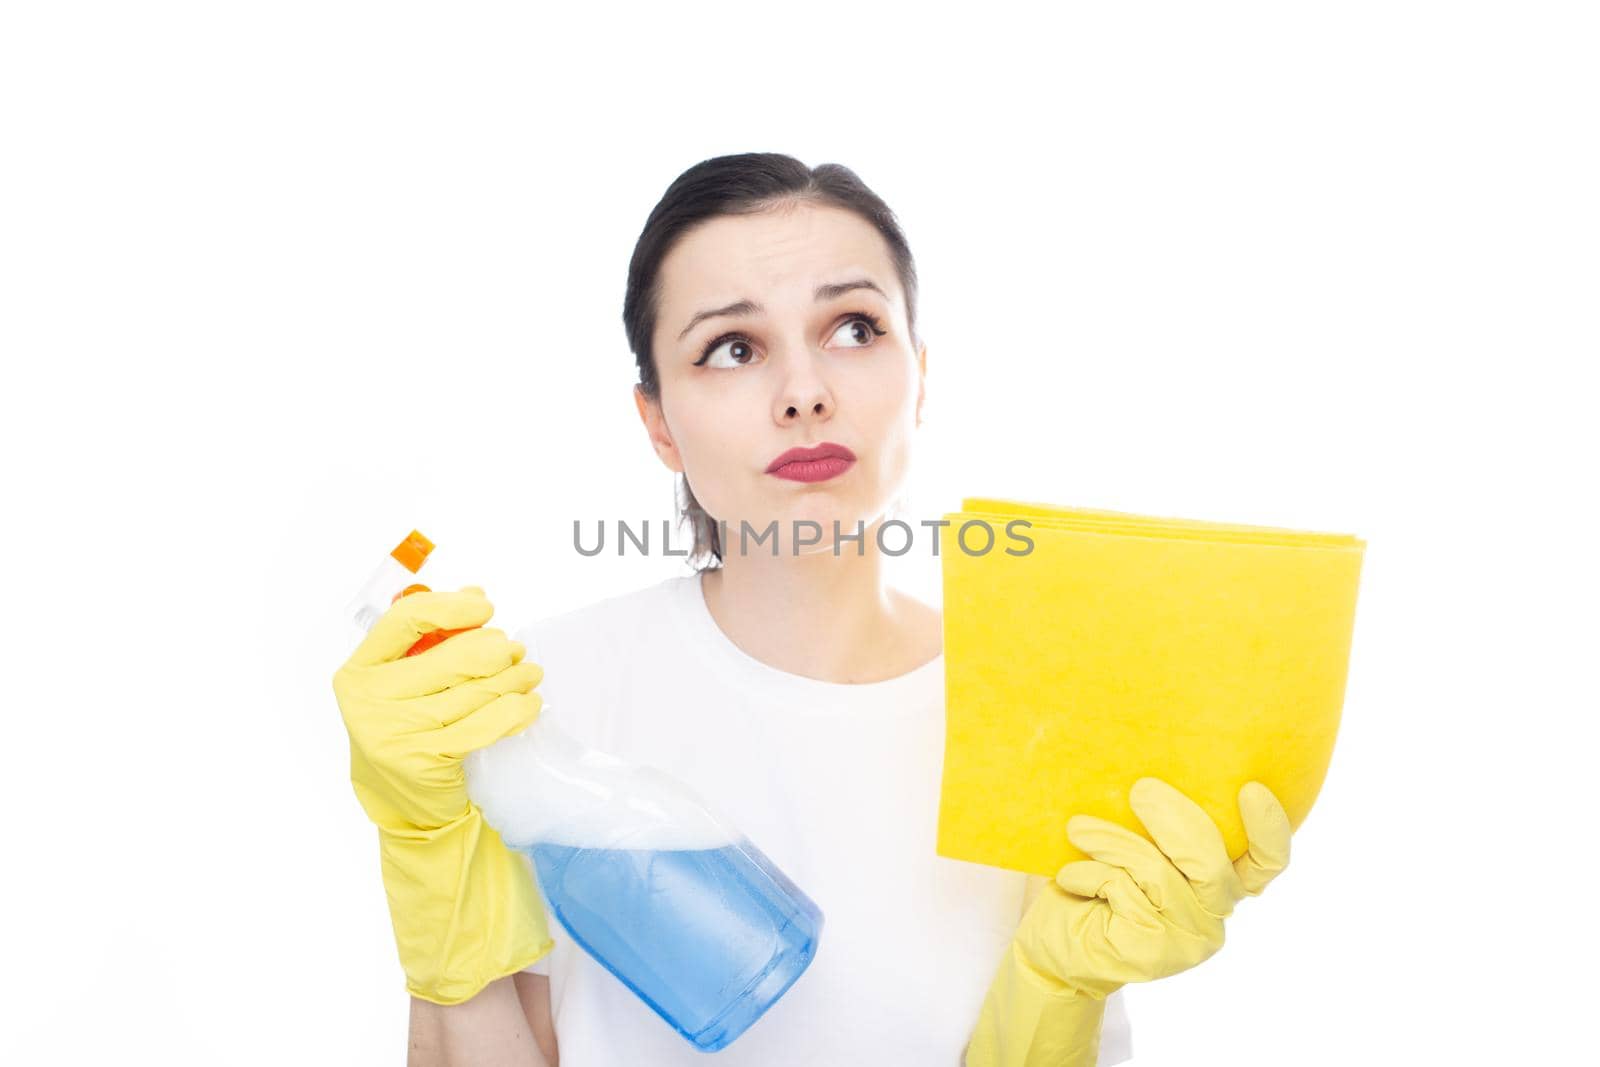 pensive woman in a white t-shirt on her hands yellow cleaning gloves holds window cleaner and rags in her hands, white background. High quality photo